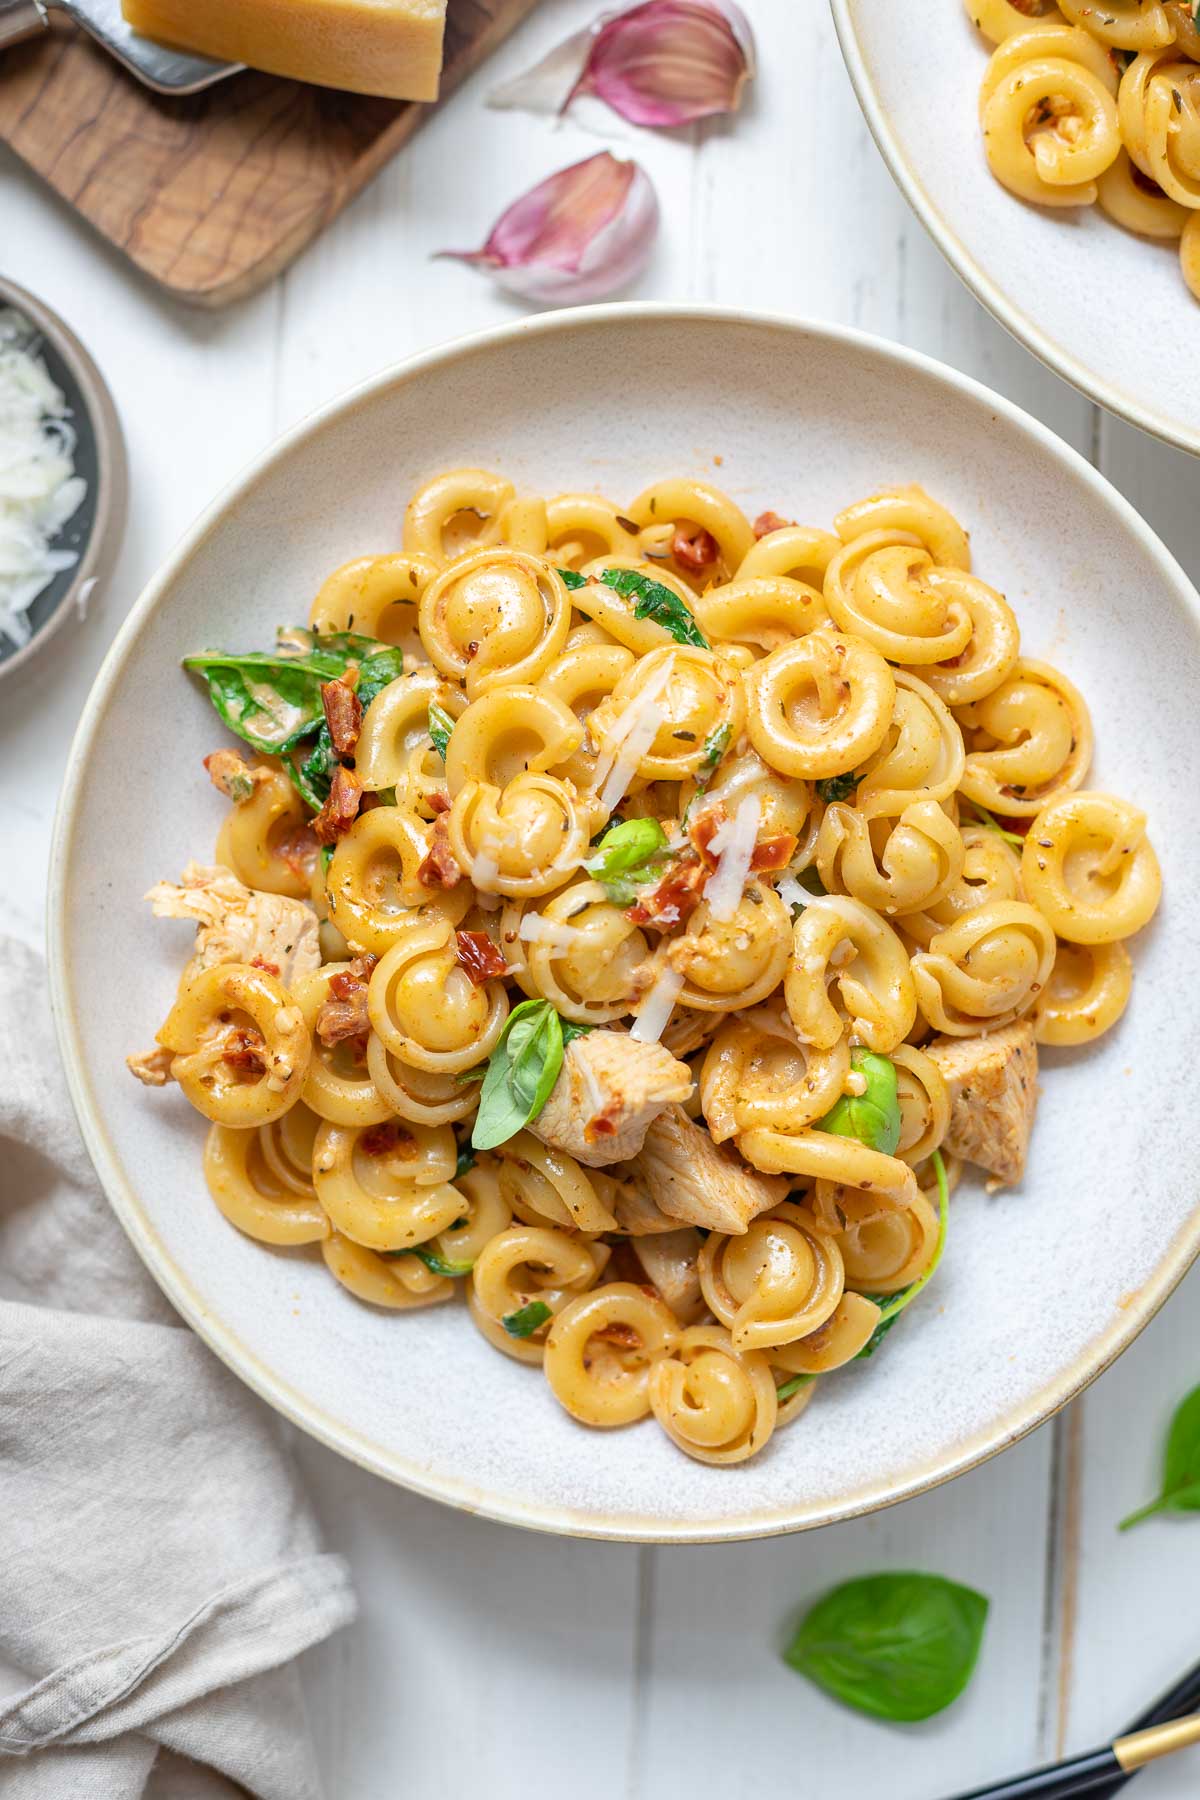 Cajun-Style Chicken Pasta with Crème Fraîche, Sun-dried tomatoes and Spinach